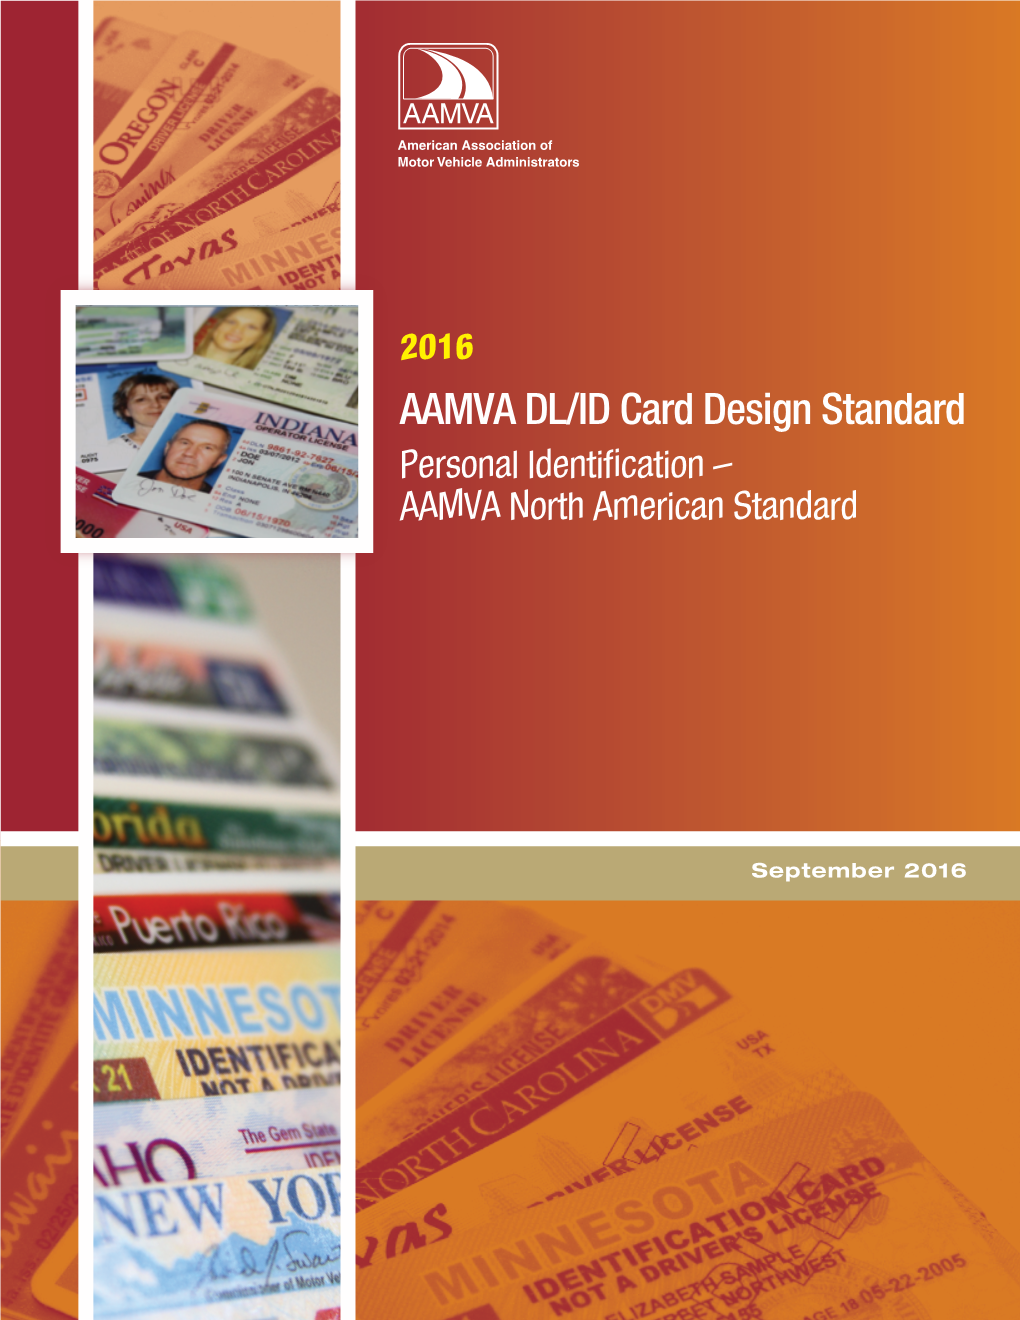 American Association of Motor Vehicle Administrators (AAMVA) Prior to the Adoption of the AAMVA DL/ID- 2000 Standard